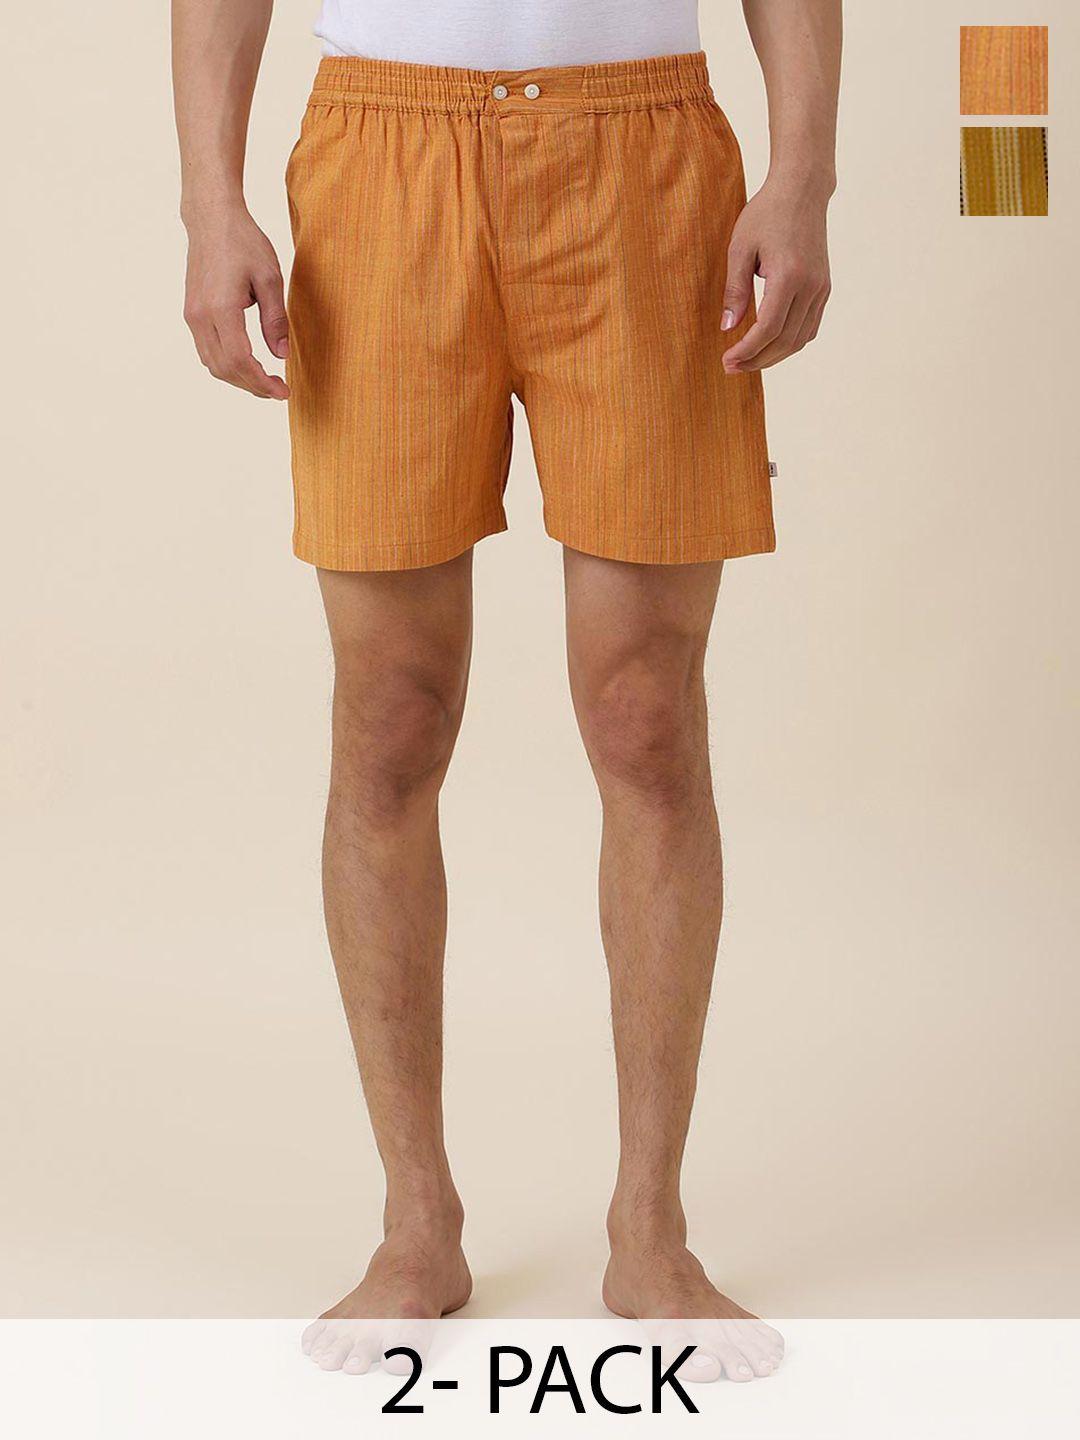 fabindia-men-pack-of-2-striped-cotton-boxers-10736186